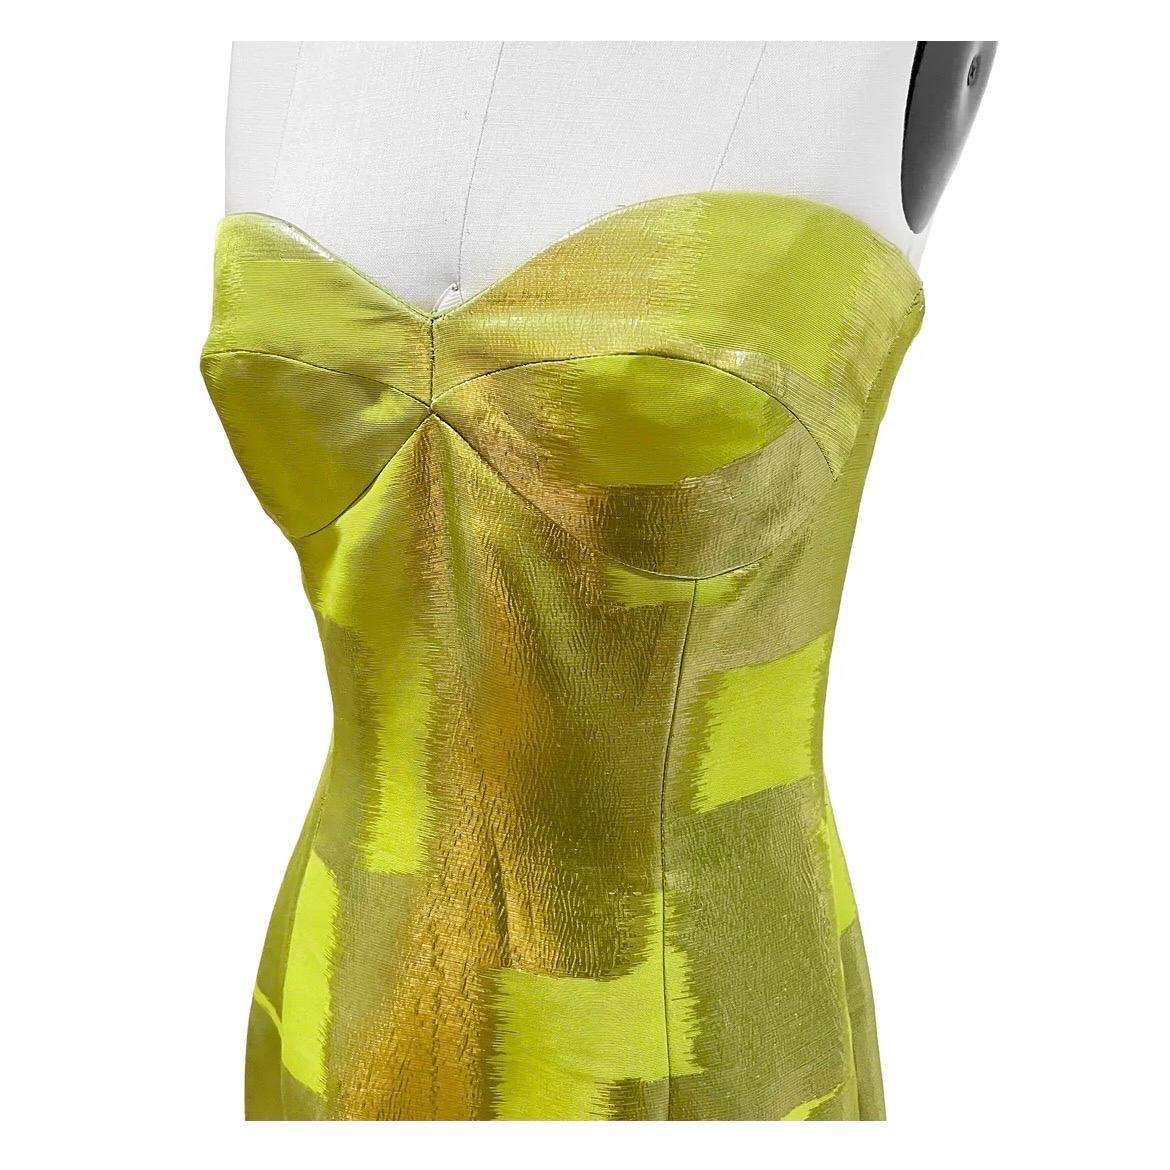 Green Strapless Vintage Gown by Oscar de la Renta
Green
Silver square pattern detail
Strapless
Dress has shorter curved cut out in front with longer back detail
Back of dress has ruched detail
Back zip closure
Heart shaped neckline 
Dress has corset